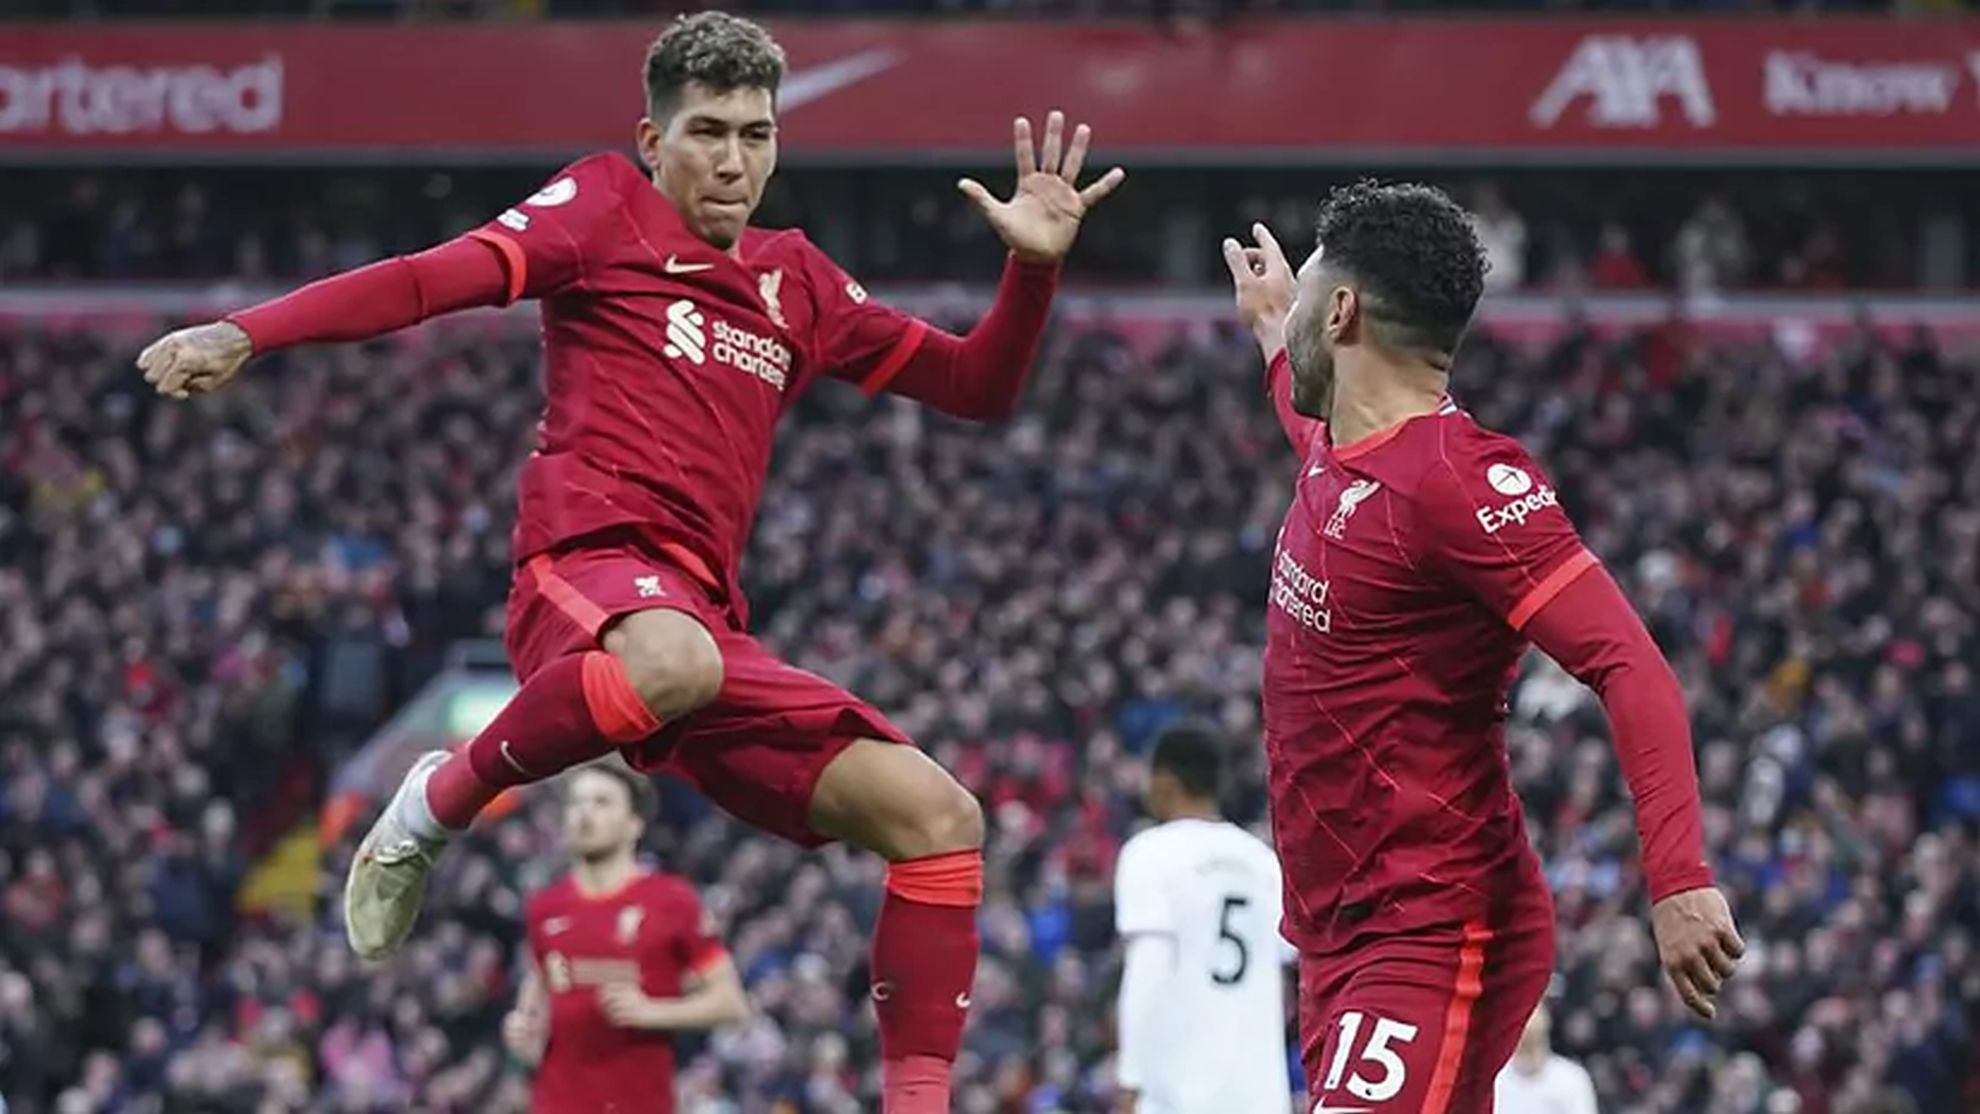 Firmino celebrates during Liverpool's win over Brentford